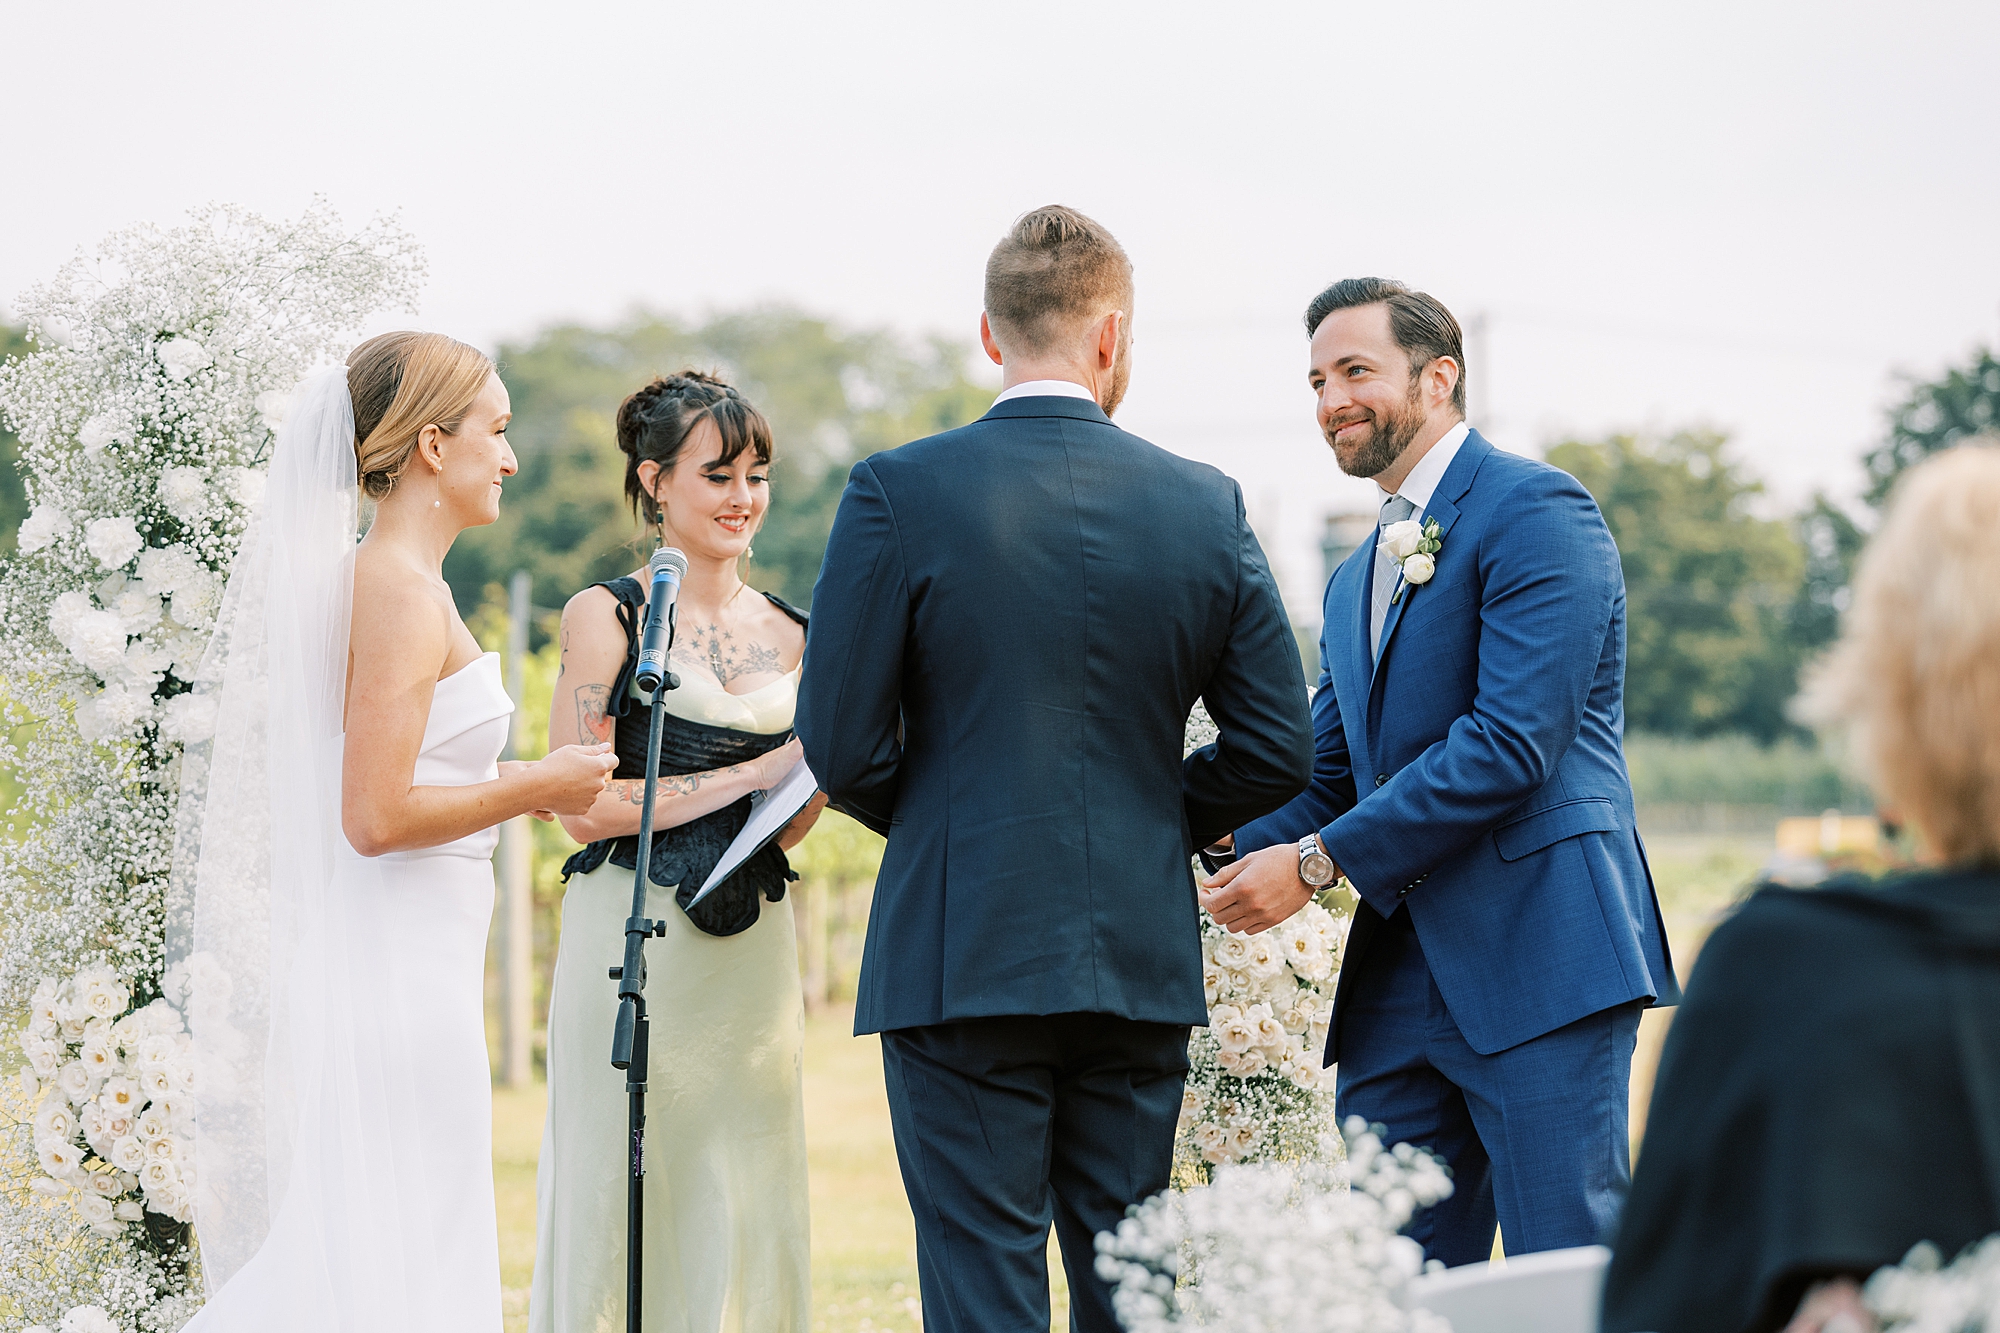 groomsman gives groom rings during wedding ceremony at Willow Creek Winery